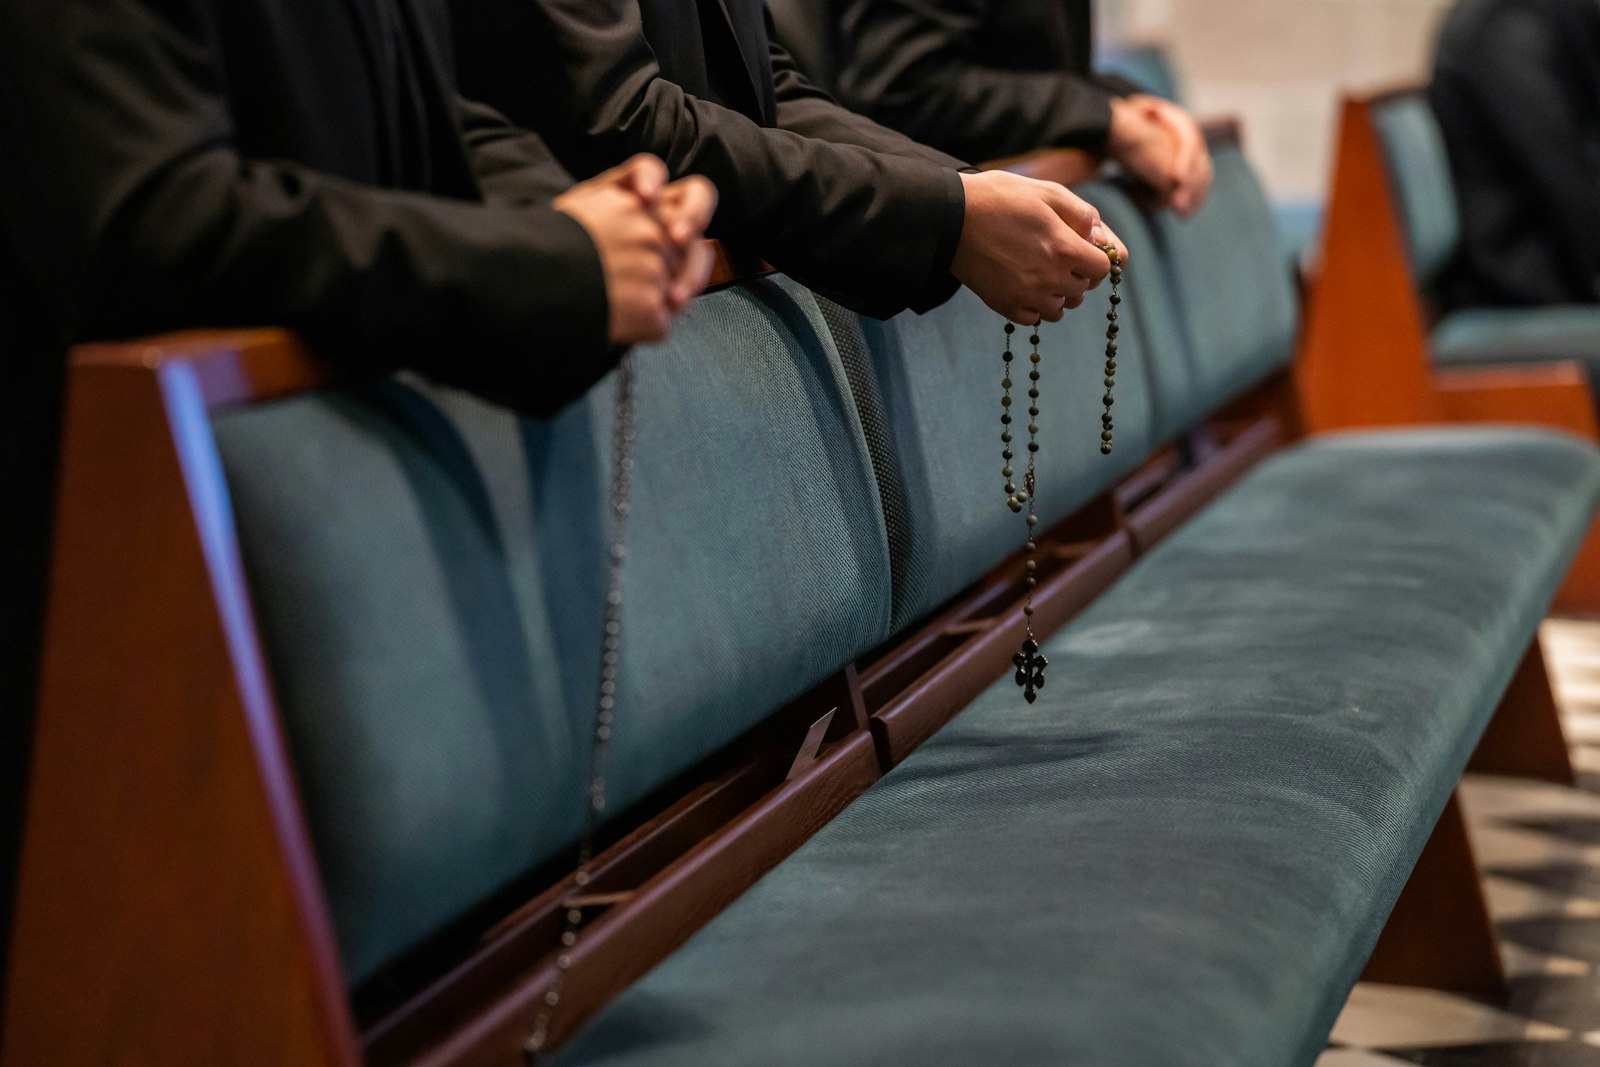 Seminarians pray the rosary during a special Mass on Respect Life Sunday at the Cathedral of the Most Blessed Sacrament in Detroit on Oct. 2. (Valaurian Waller | Detroit Catholic)